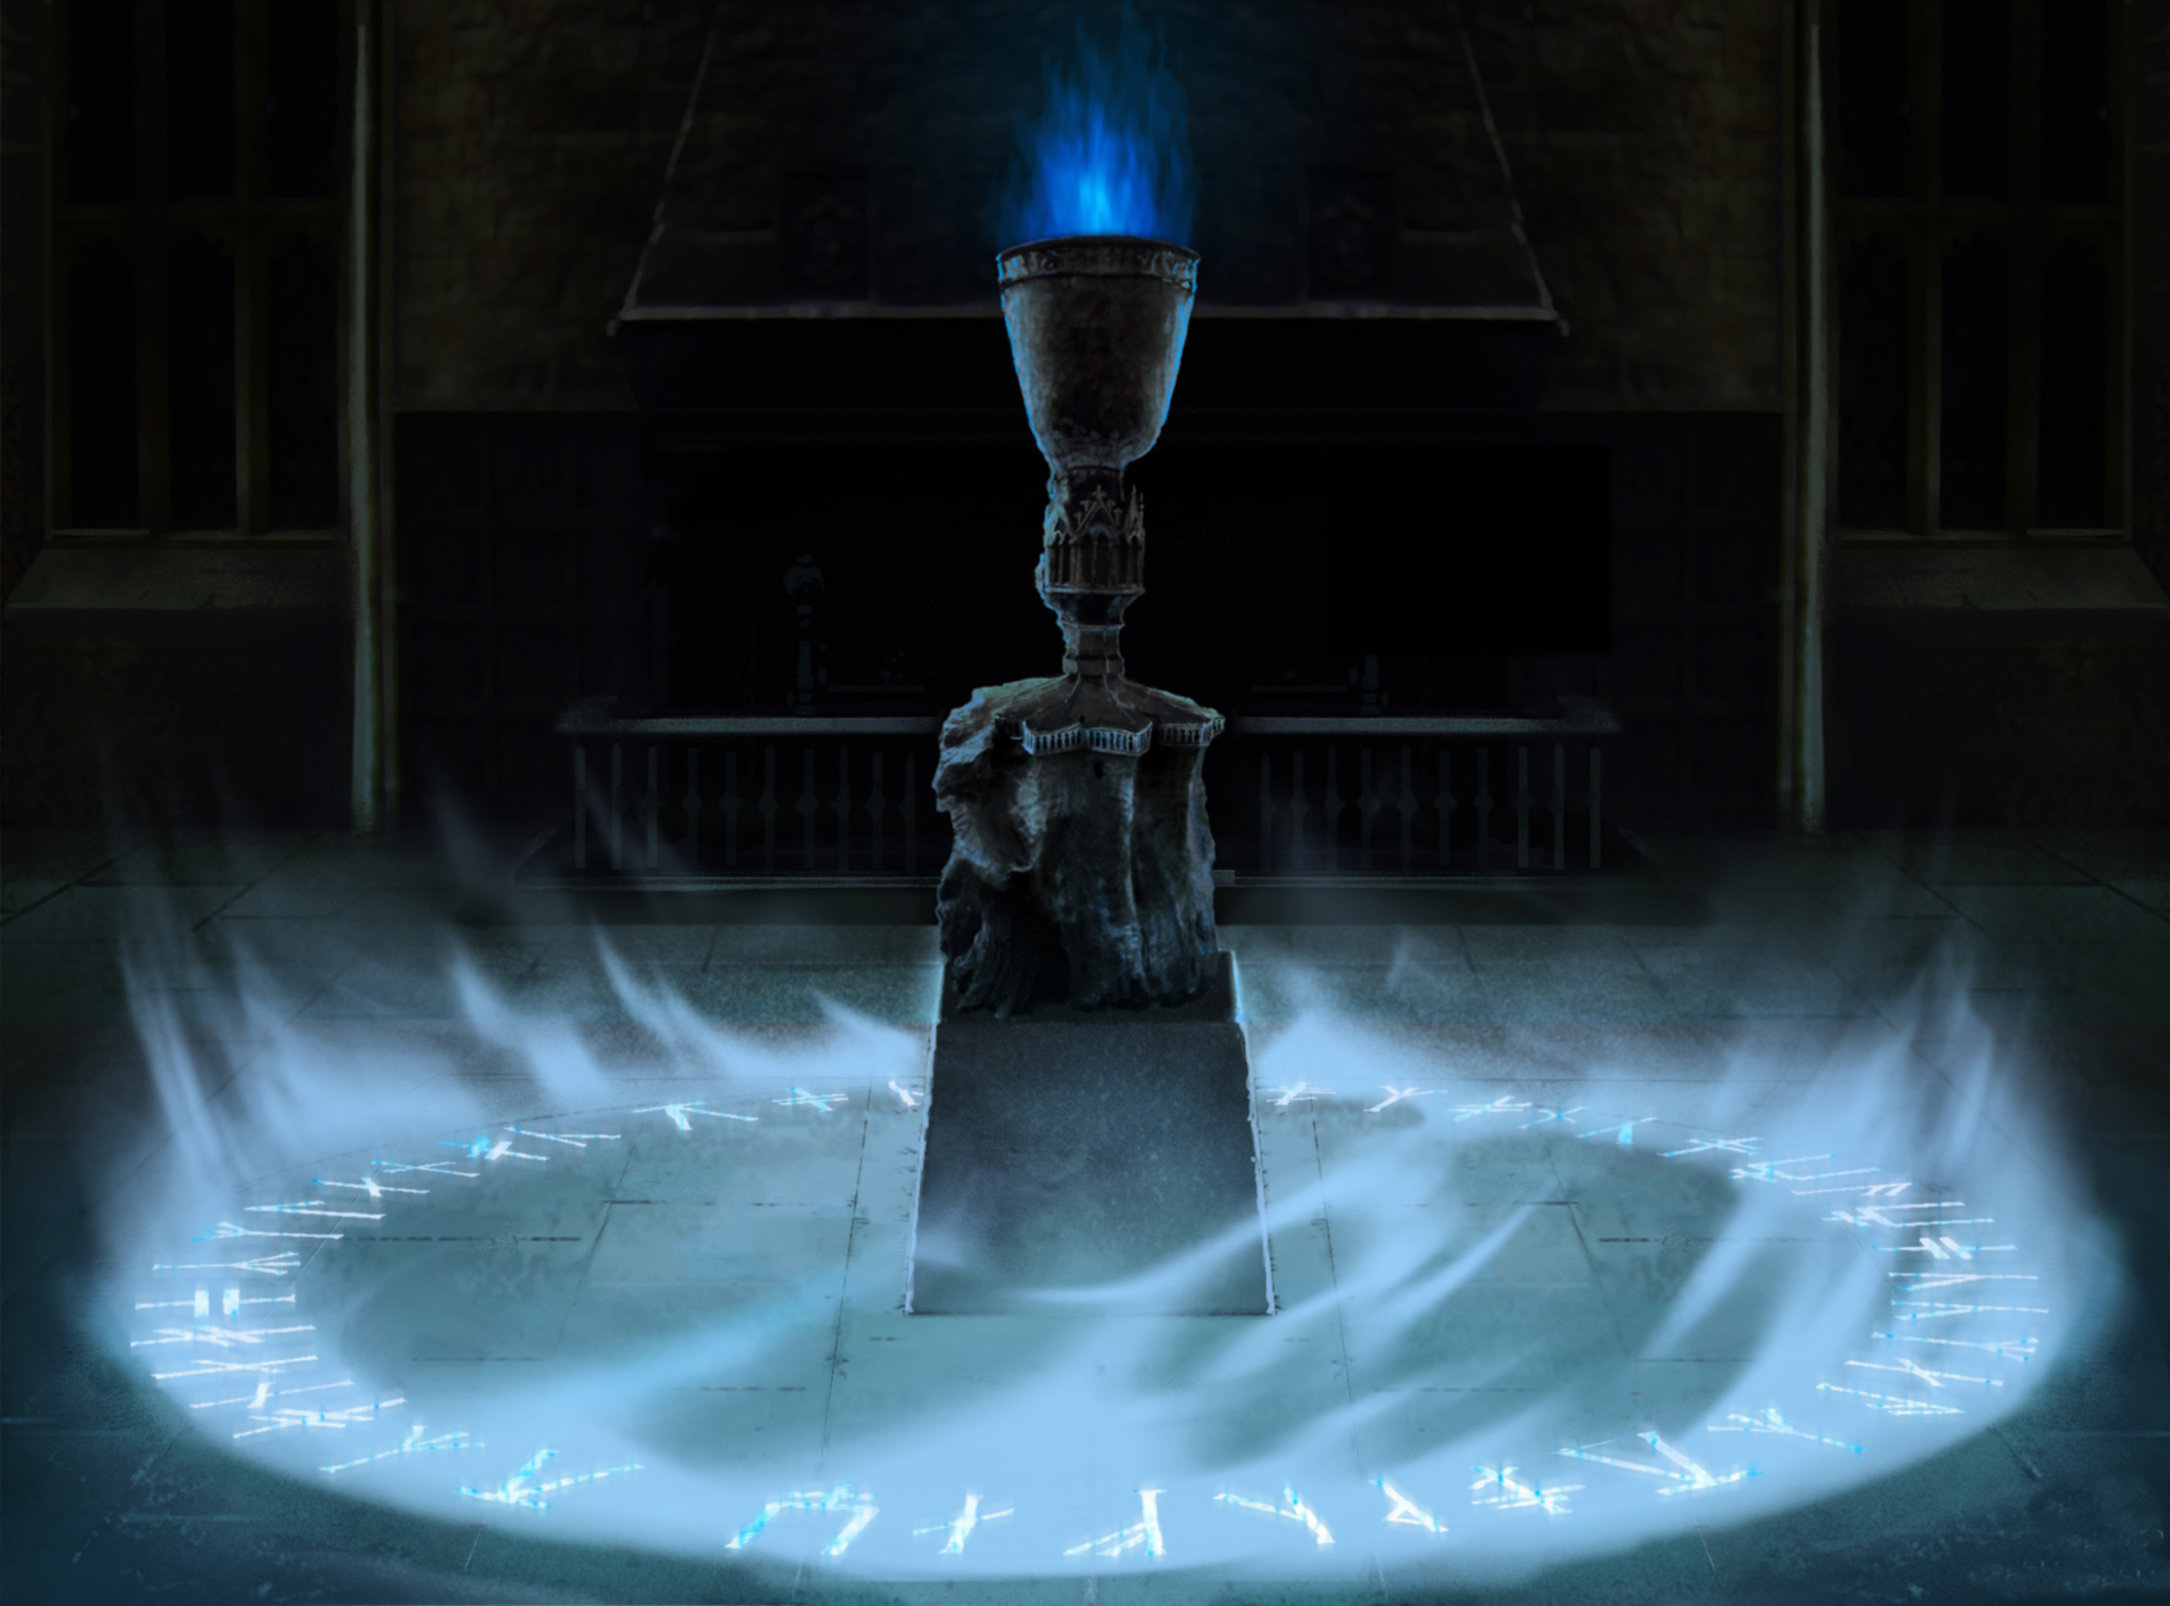 An illustration of the Goblet of Fire and the Age Line.